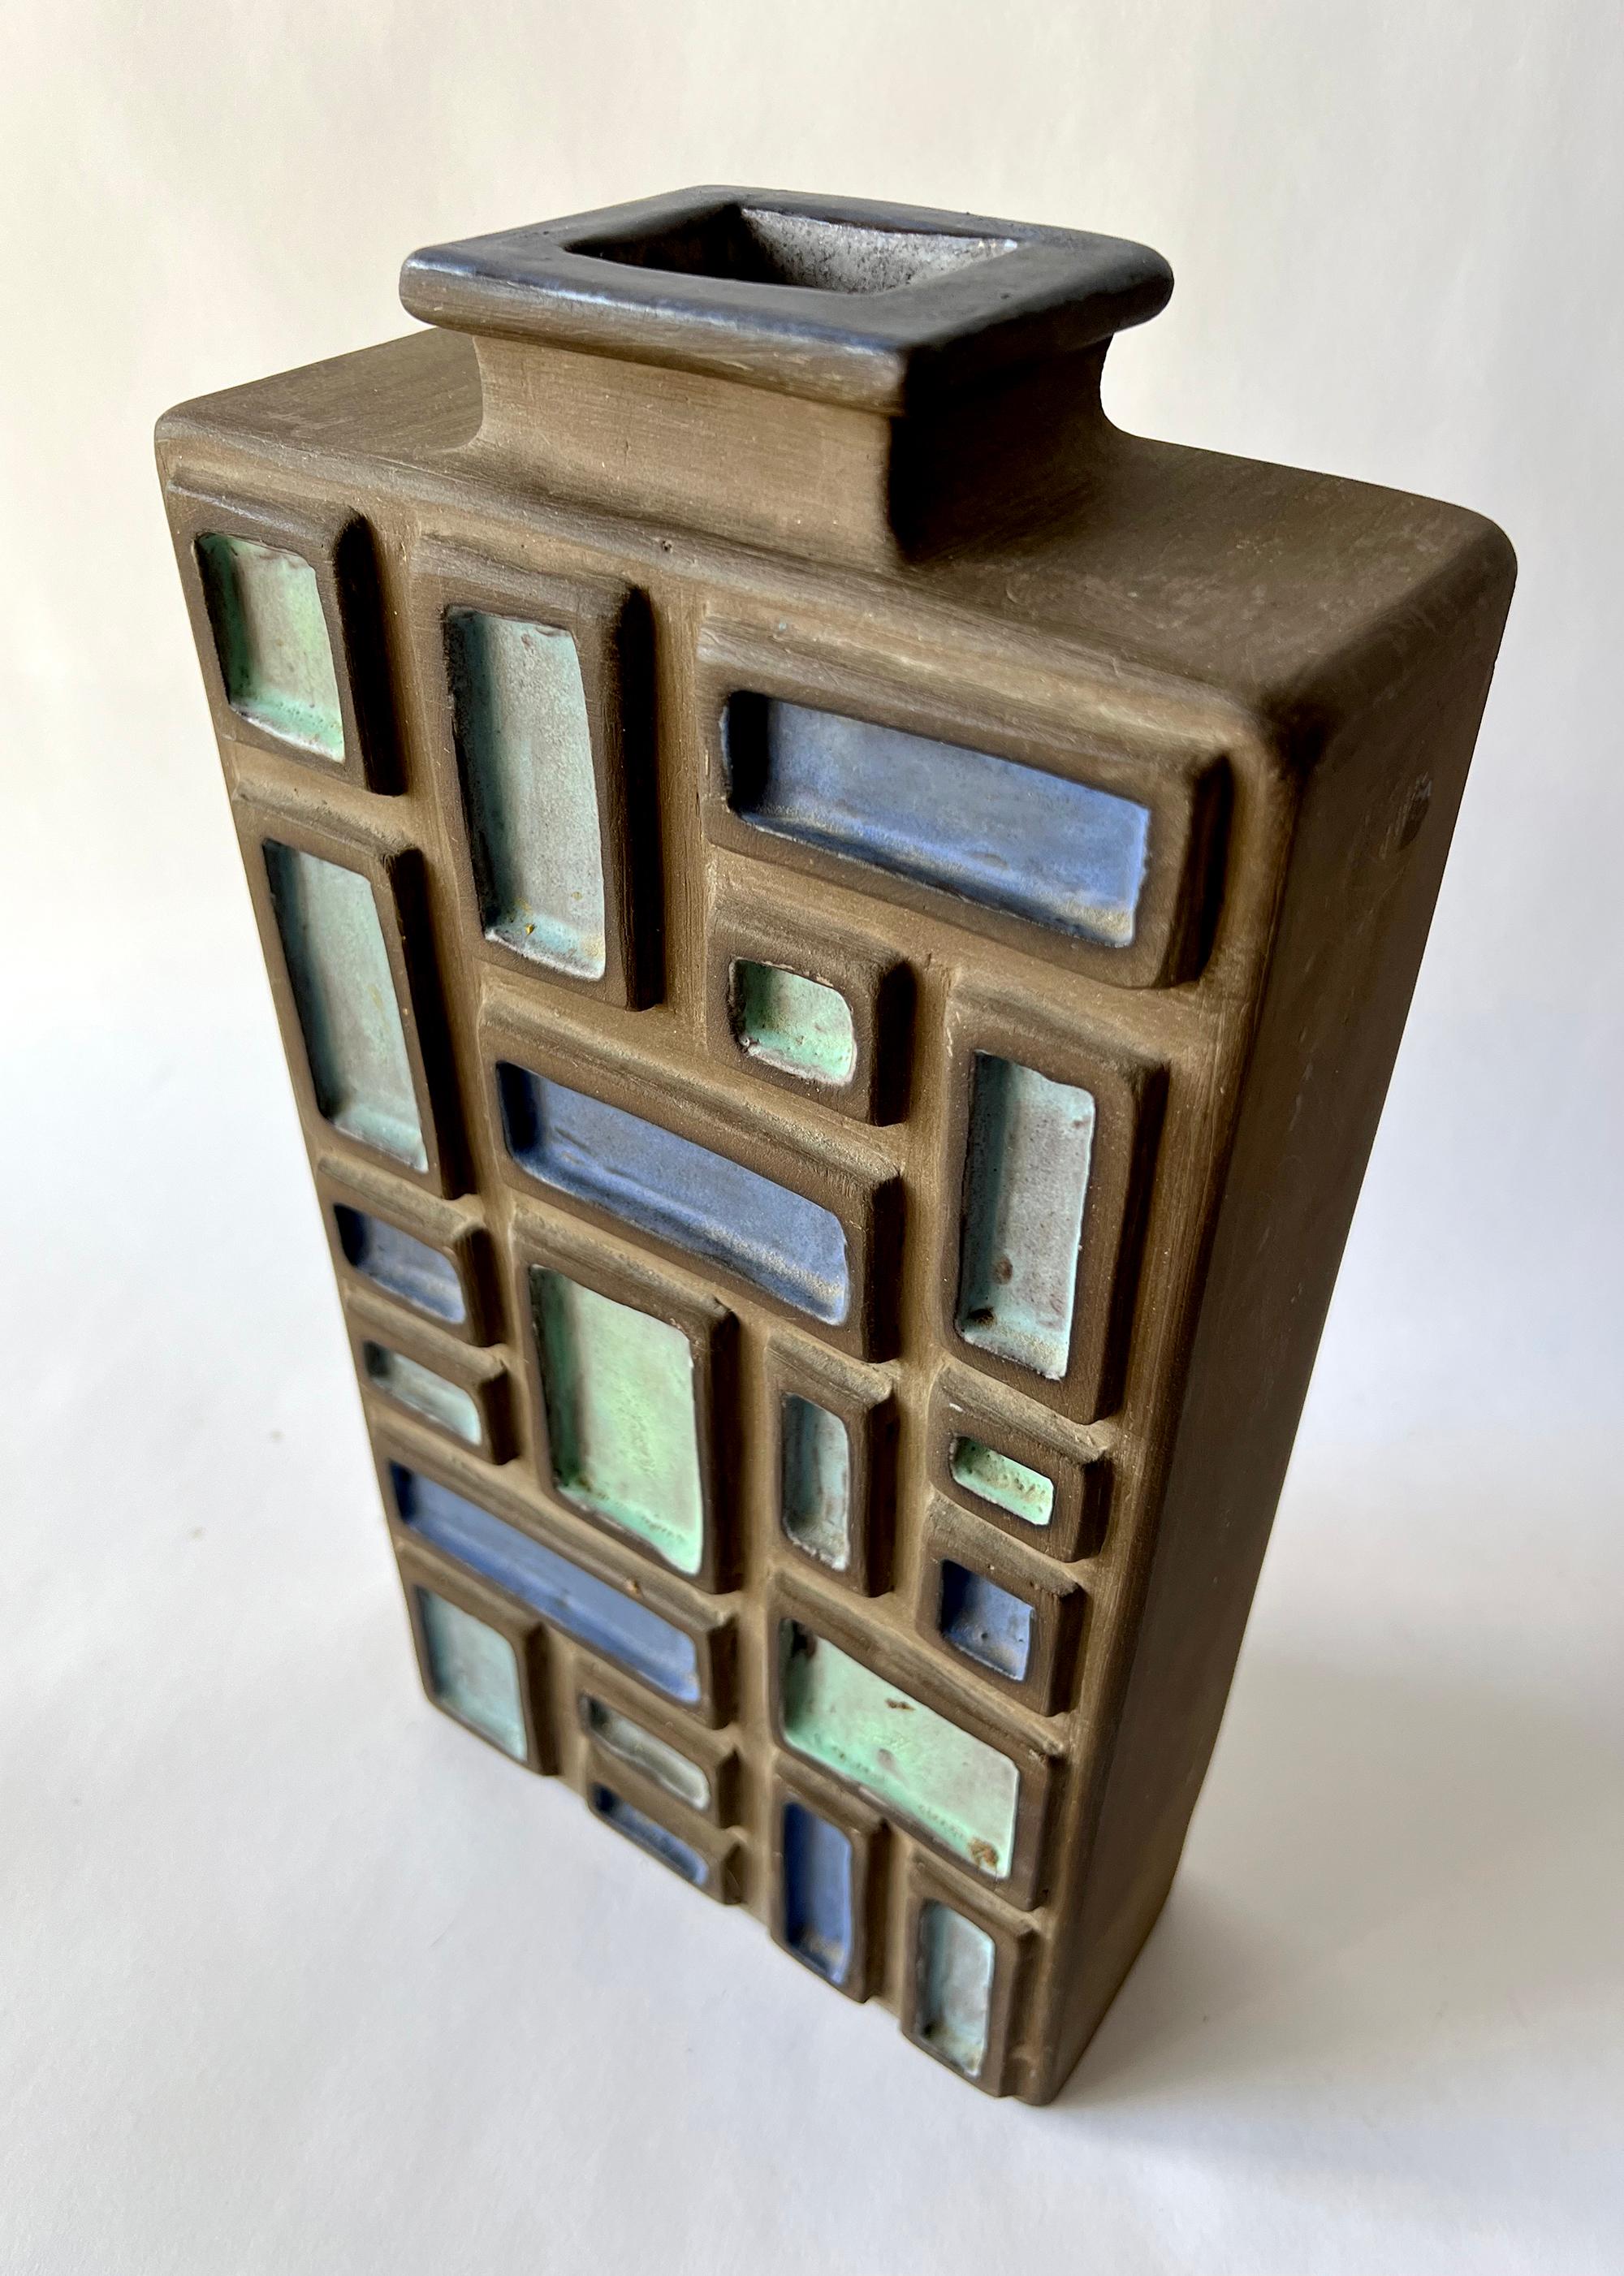 Large scale modernist bottle vase created by John W. Delaplane of Indianapolis, Indiana, circa 1966. Bottle is made of a dark, bisque clay body and decorated with mosaic geometric shapes in blue and light green on the front side only. Signed with a